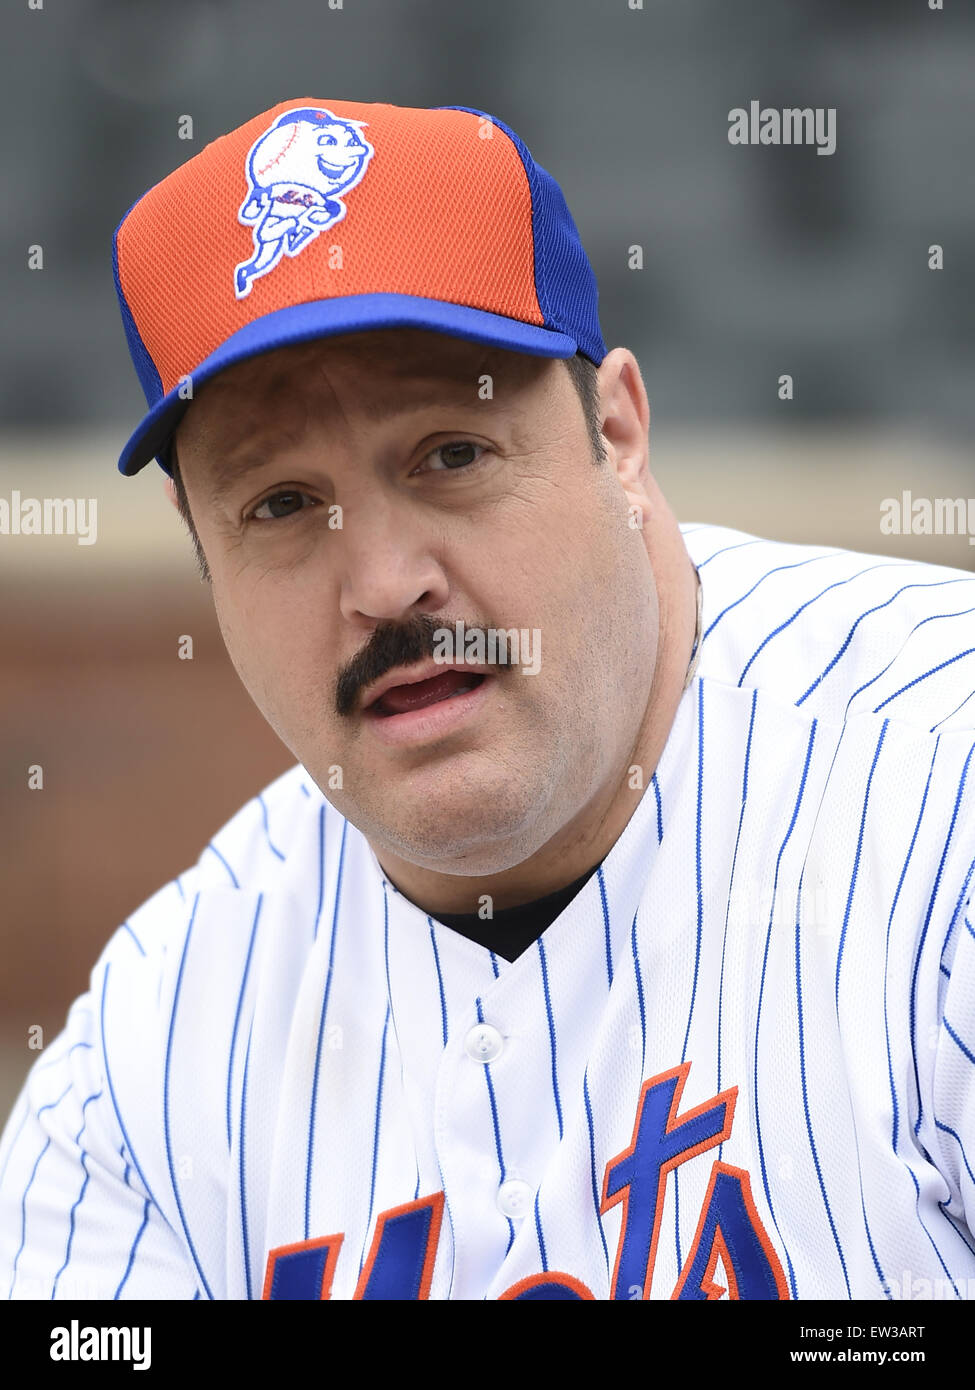 The King of Queens sitcom actor Kevin James, takes batting practice at Citi  Field stadium in Queens, the home baseball park of the New York Mets  Featuring: Kevin James Where: United States